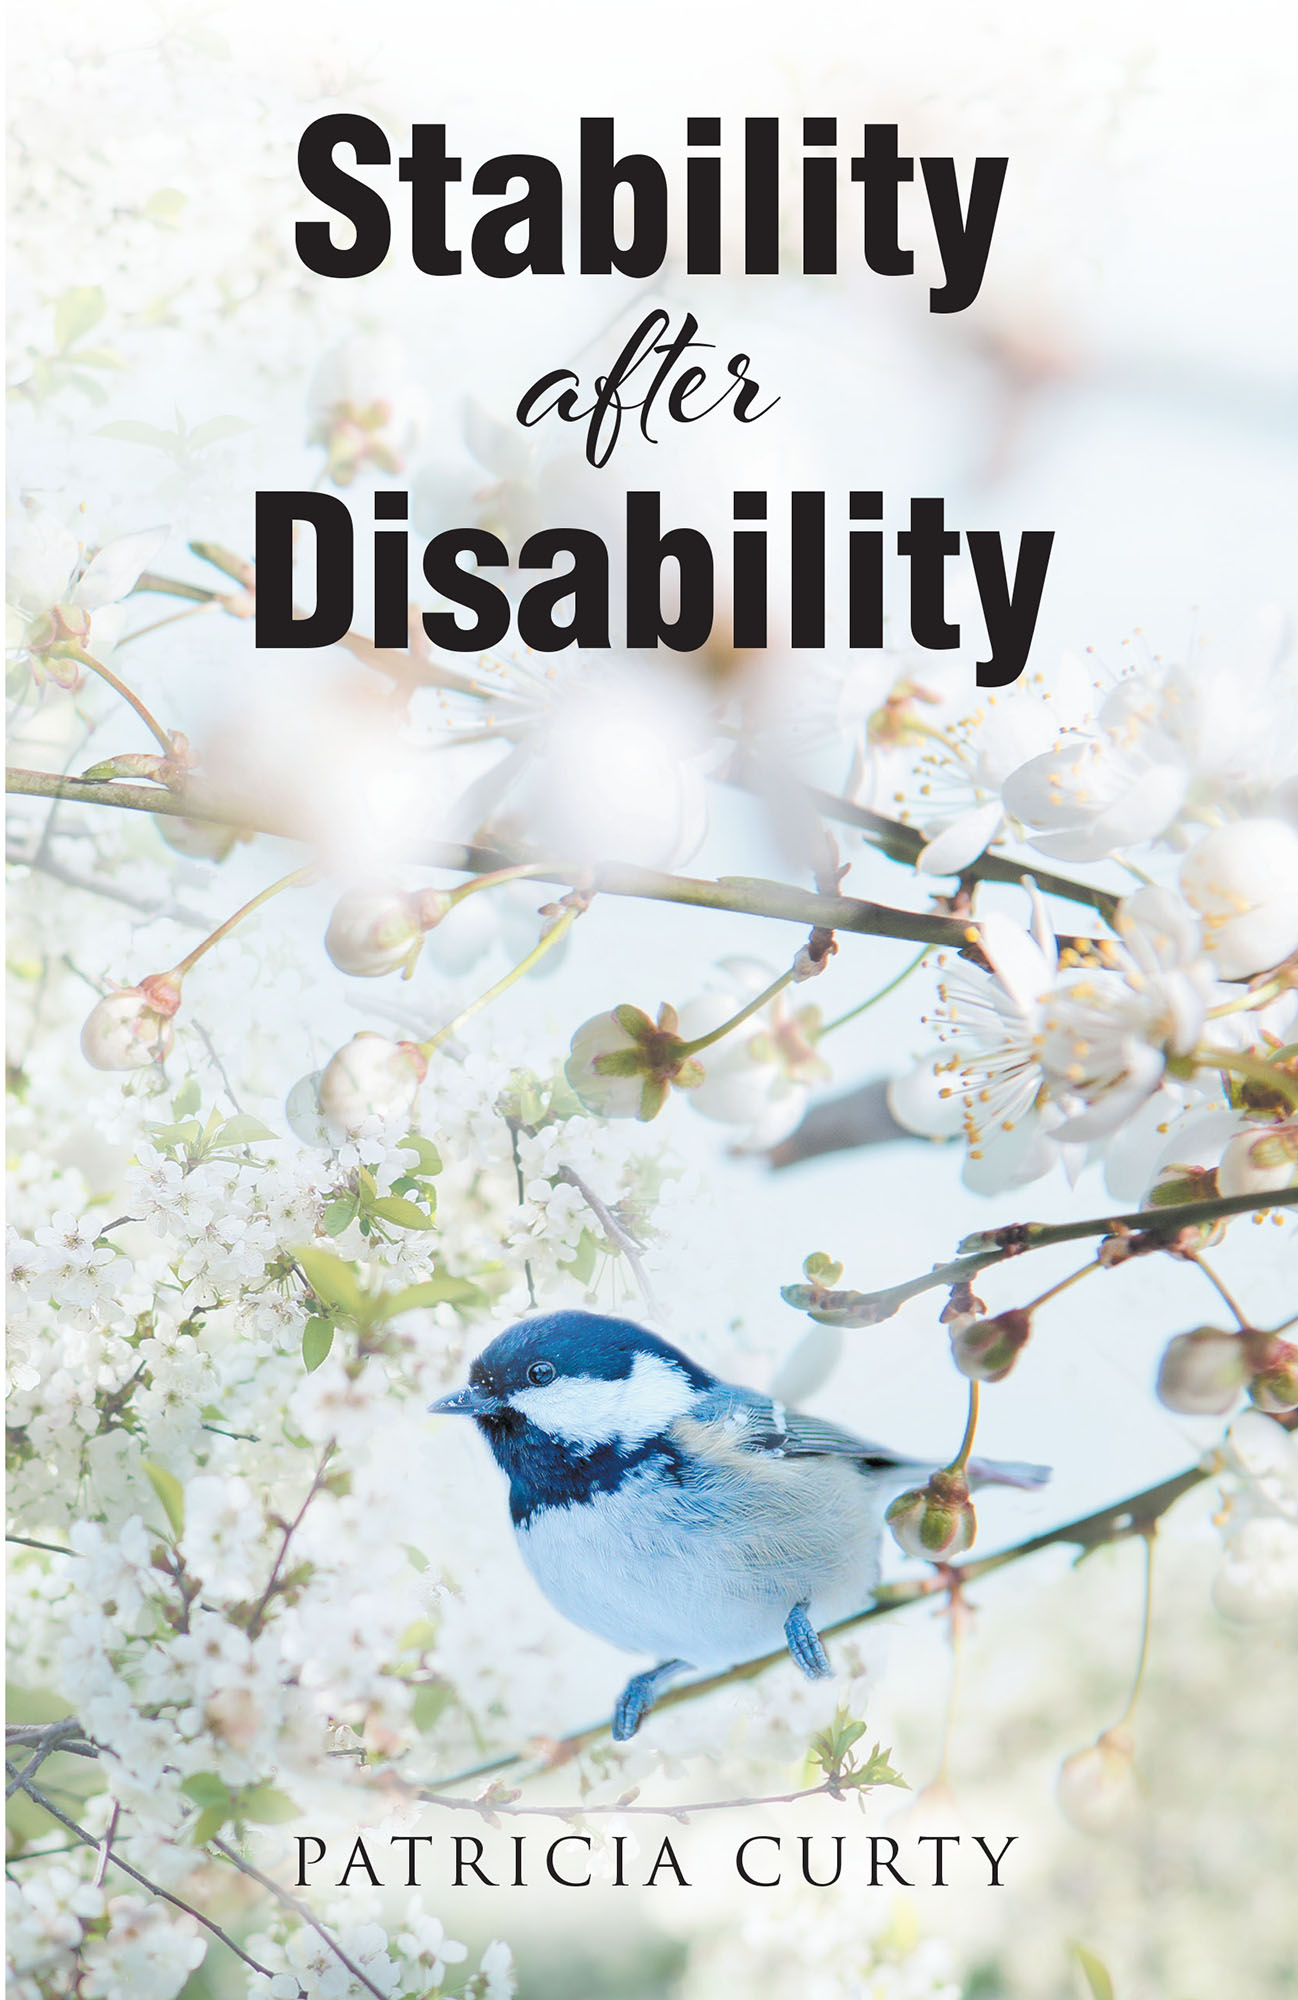 Patricia Curty’s Newly Released "Stability After Disability" is an Encouraging Discussion of Navigating Life with a Disability